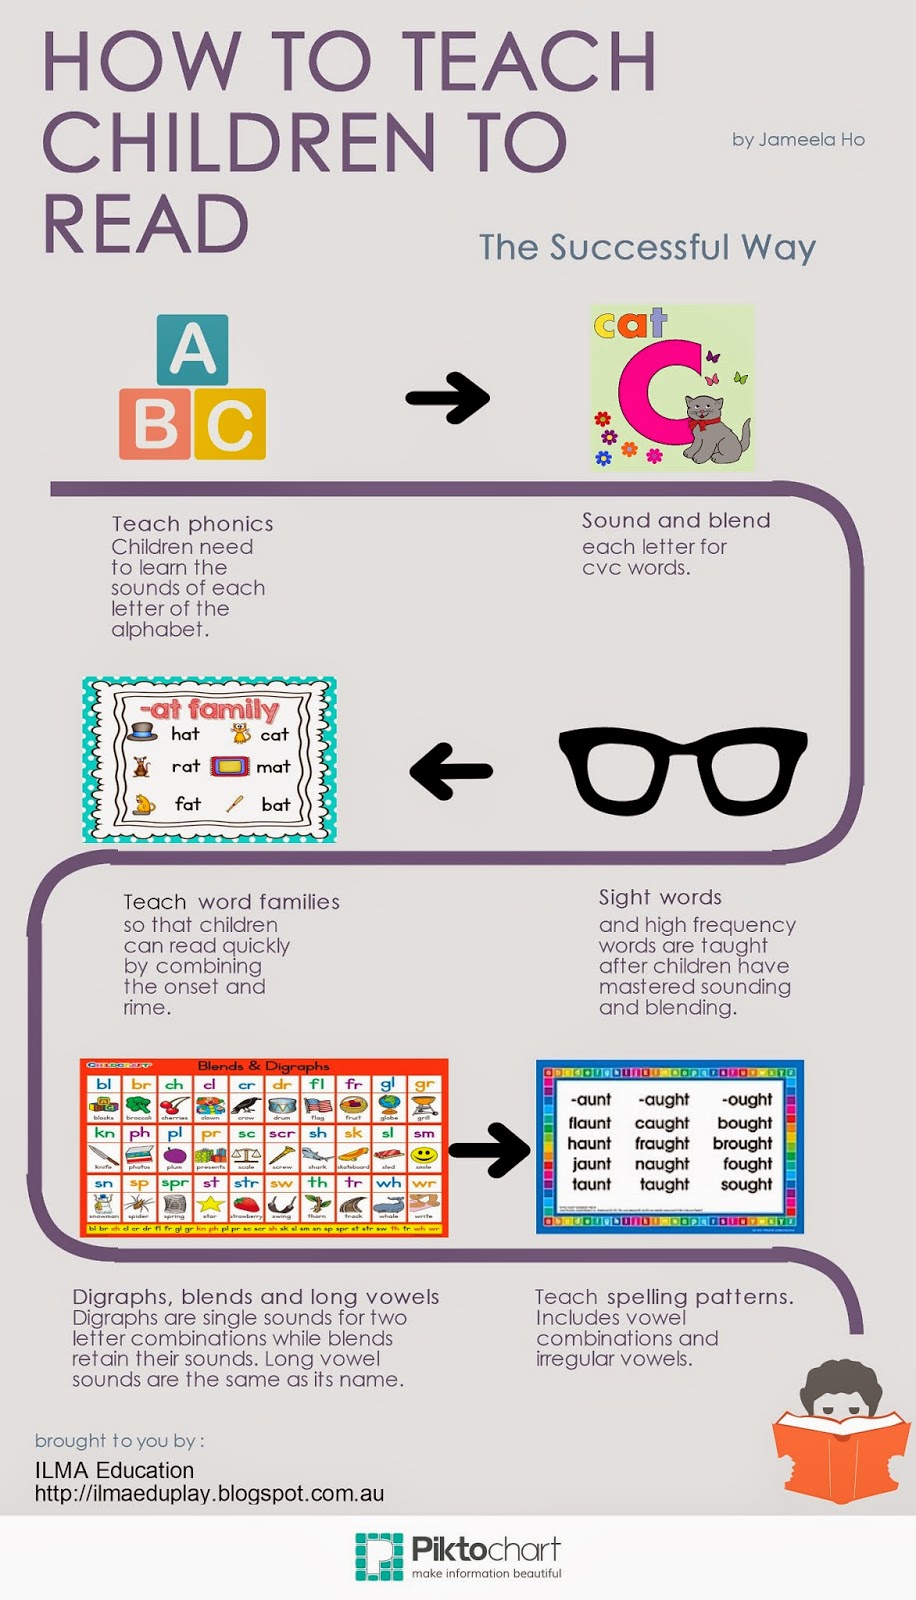 ILMA Education Infographic on How To Teach Children To Read